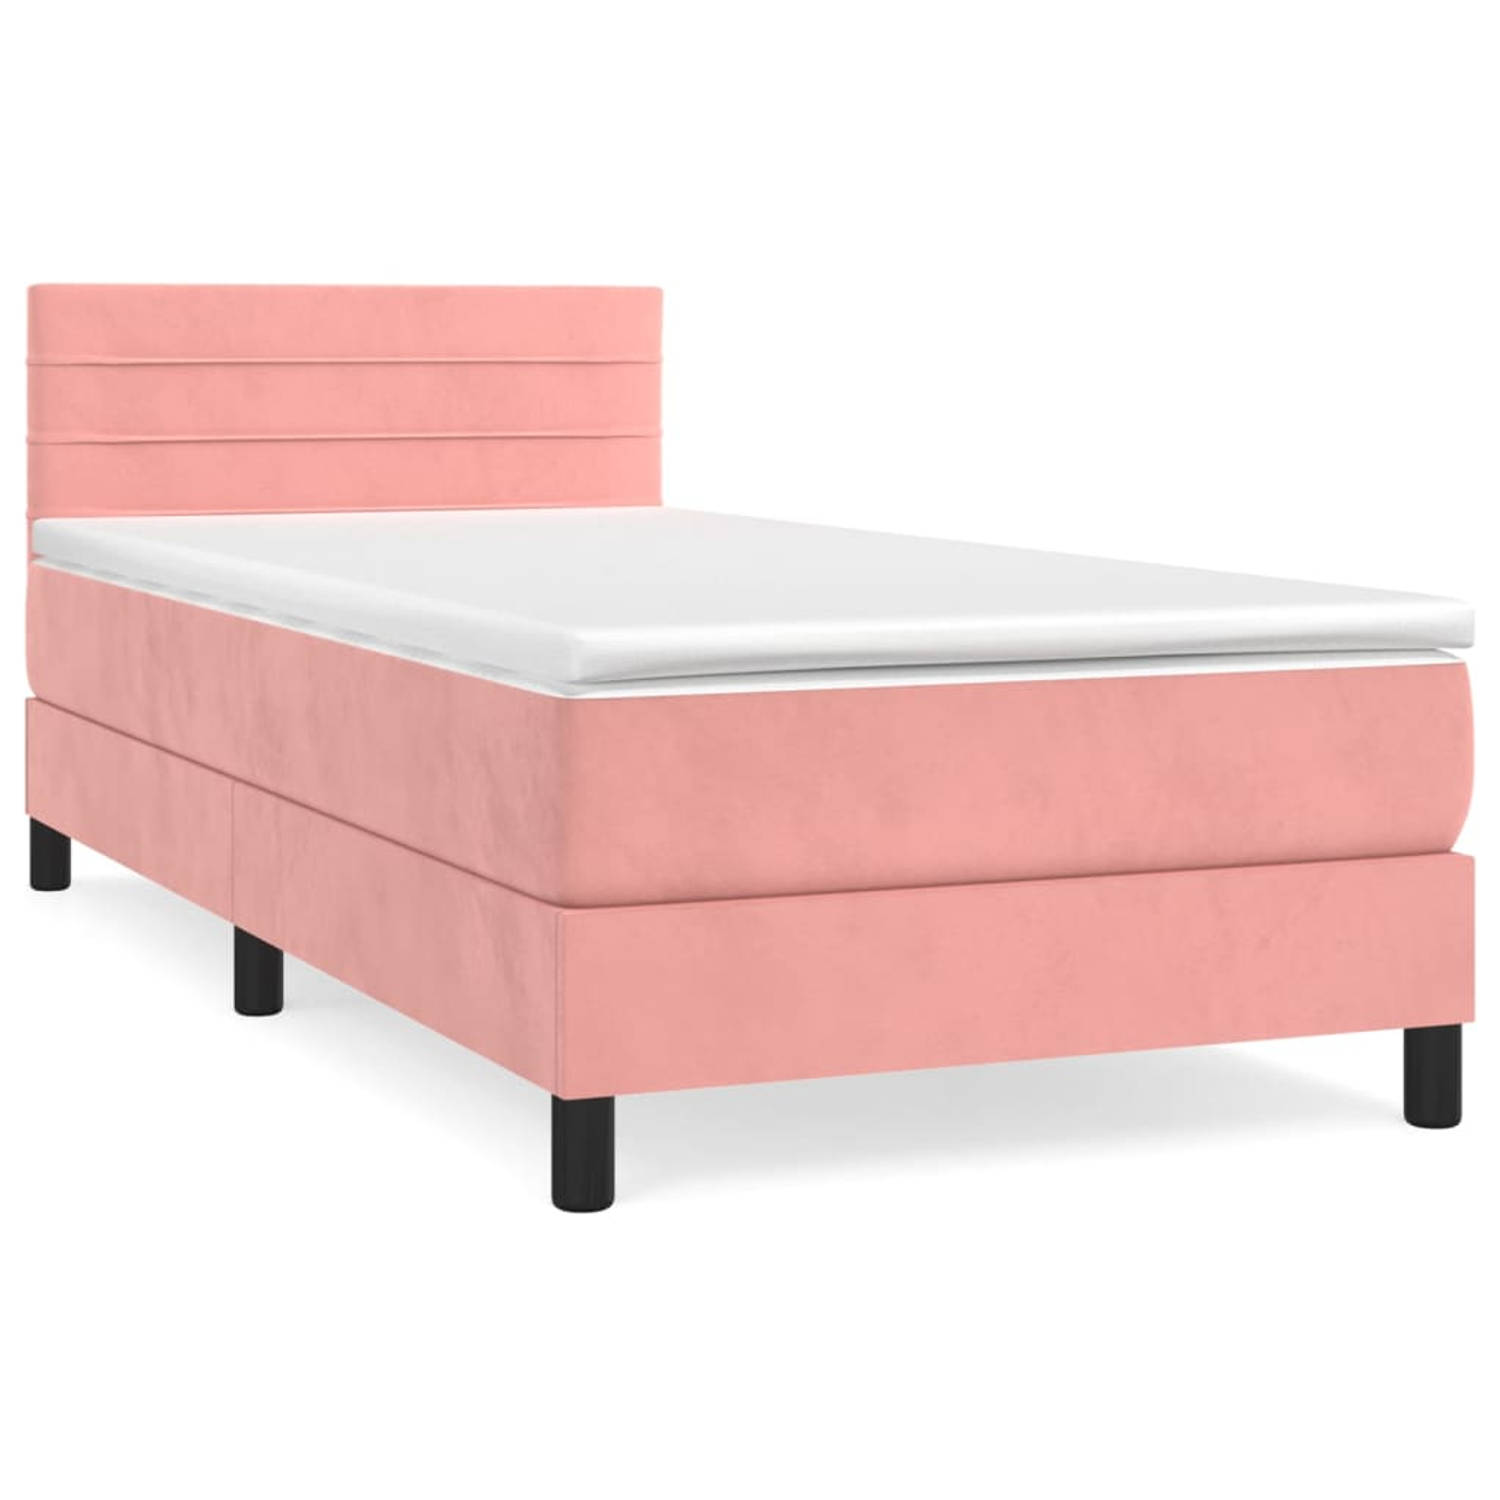 The Living Store Boxspringbed - Roze - 193 x 90 x 78/88 cm - Fluweel - Pocketvering